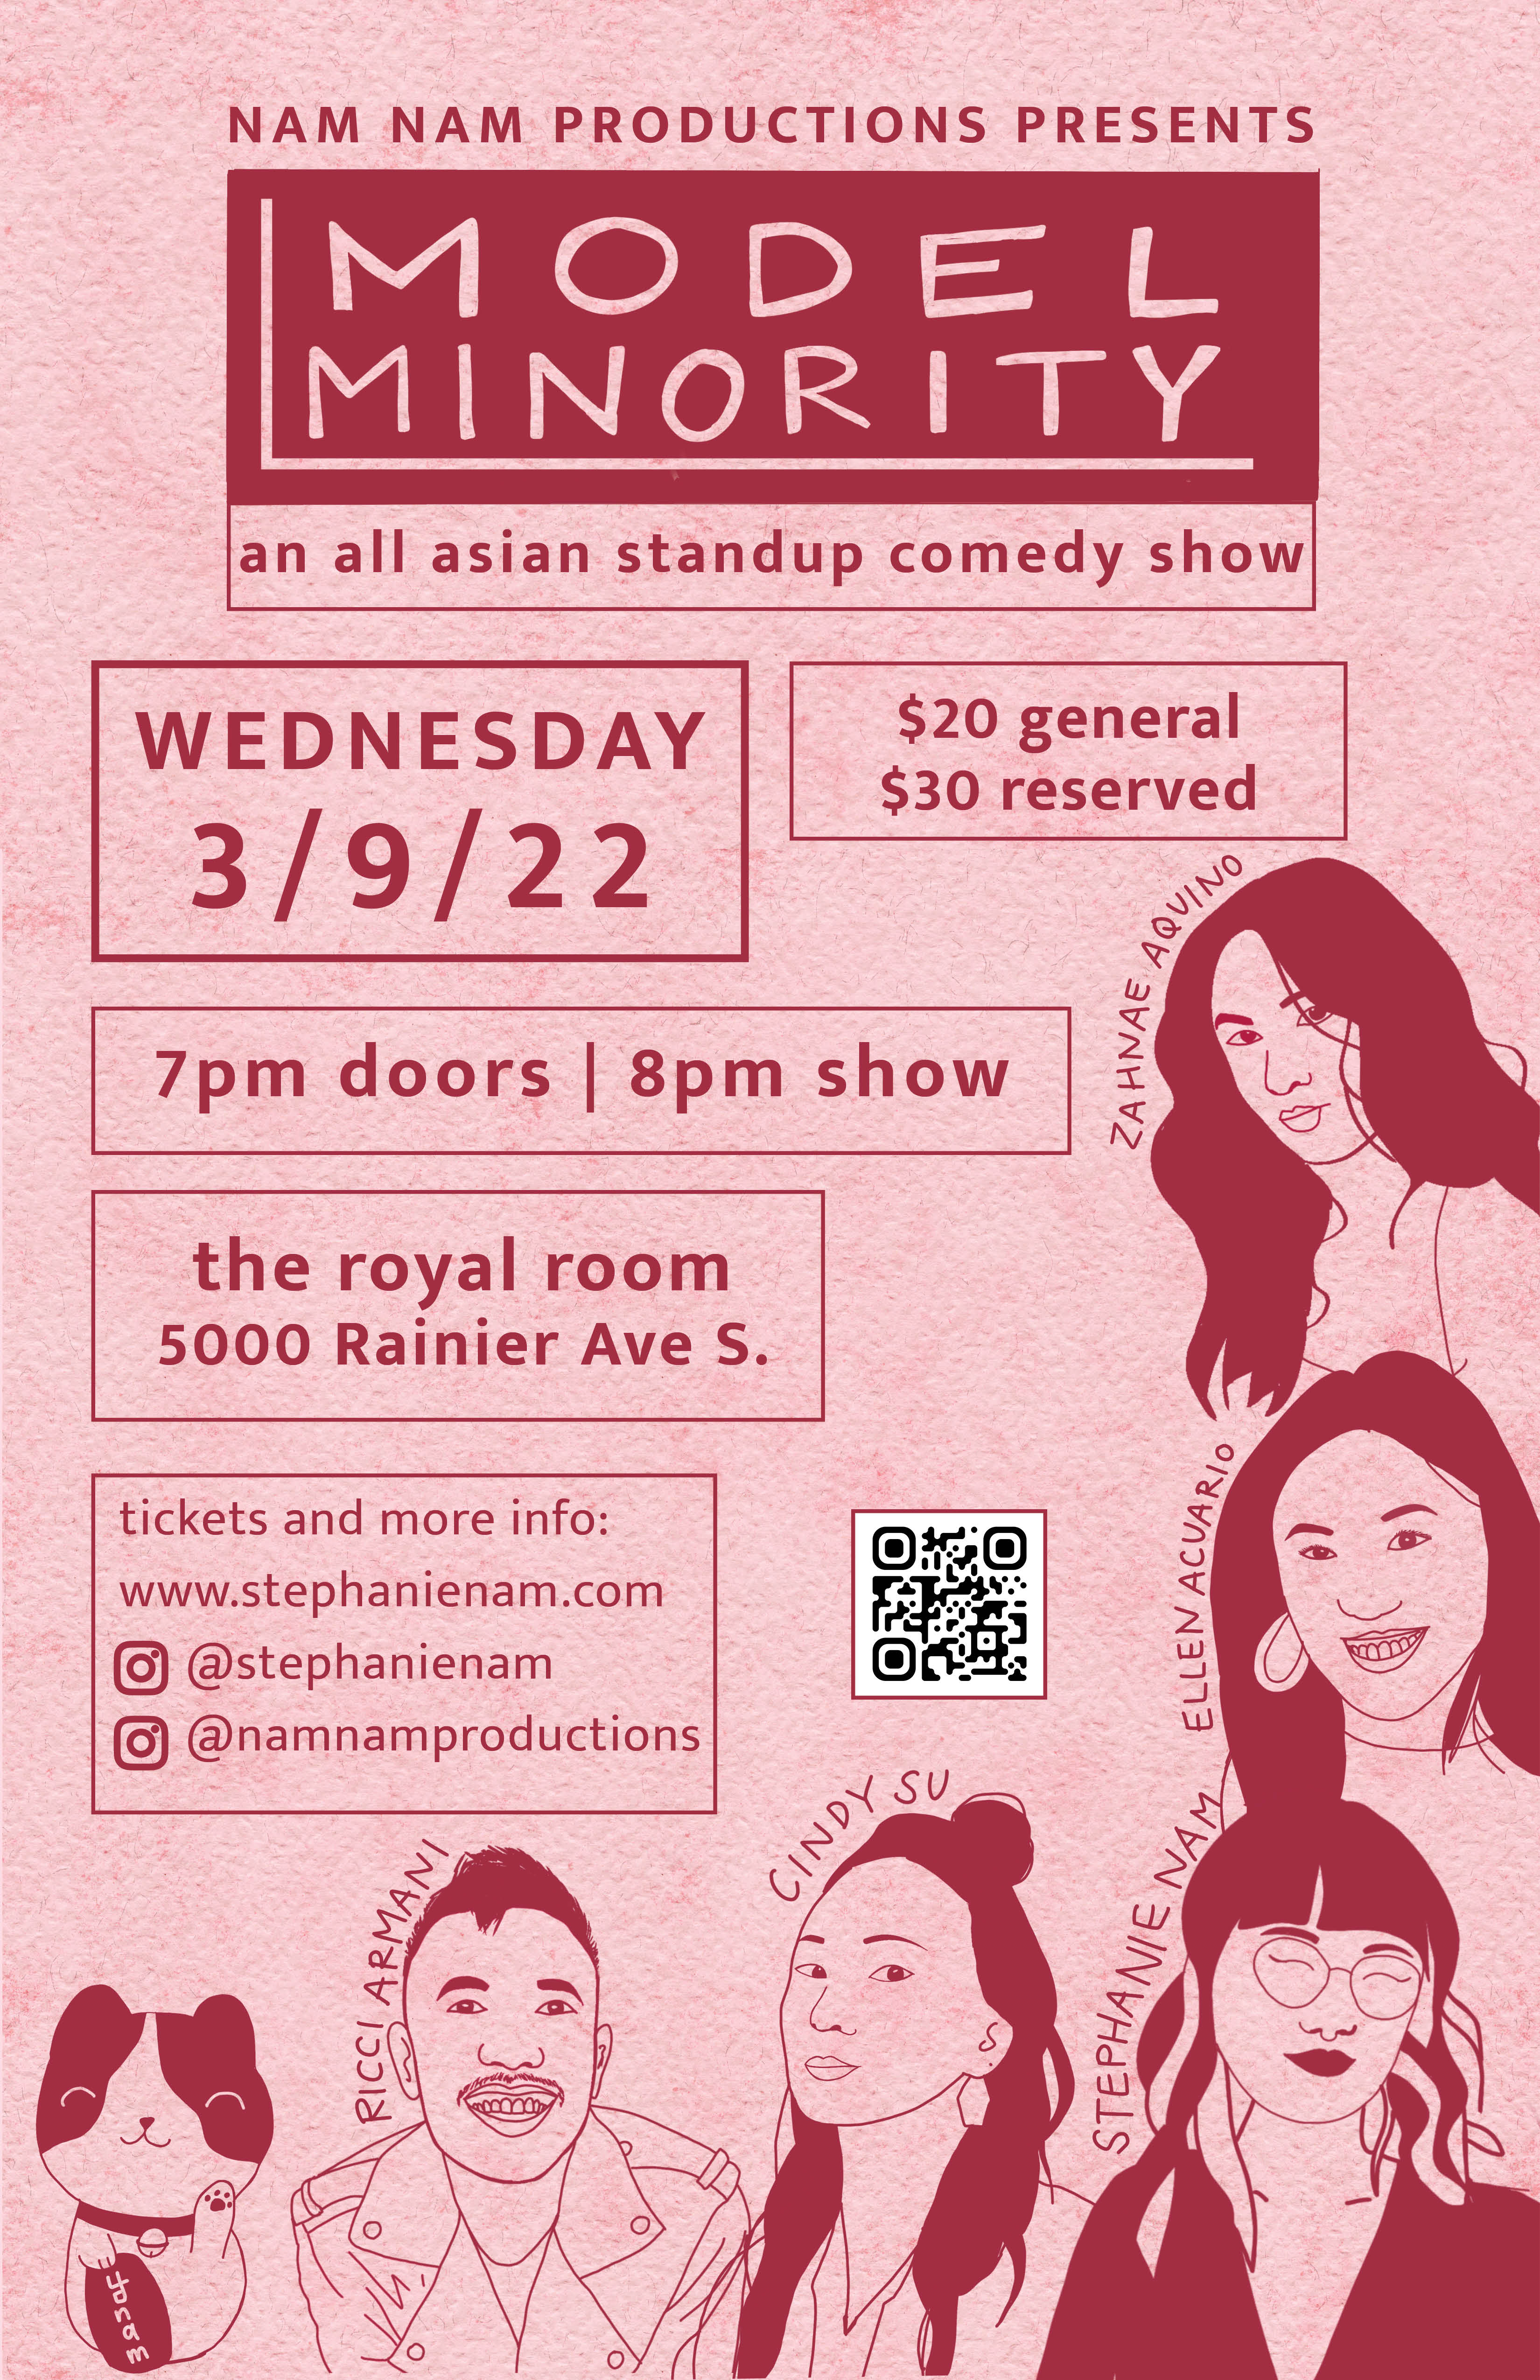 Model Minority: An All Asian Comedy Show